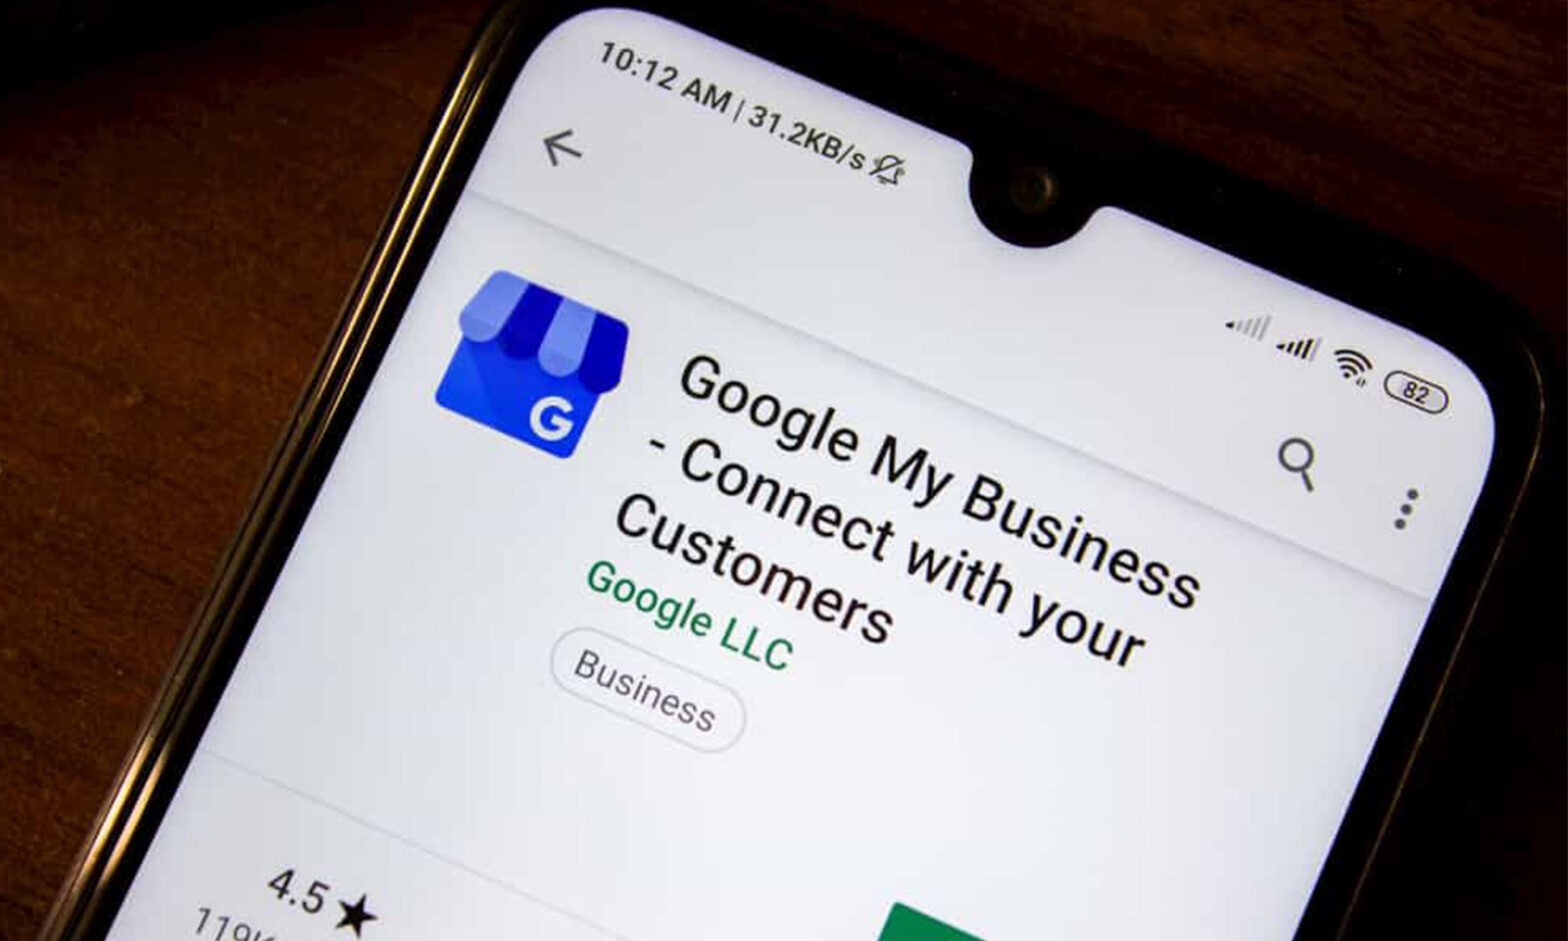 Featured image for post: How to Update Your Google My Business Listings During the Coronavirus Pandemic